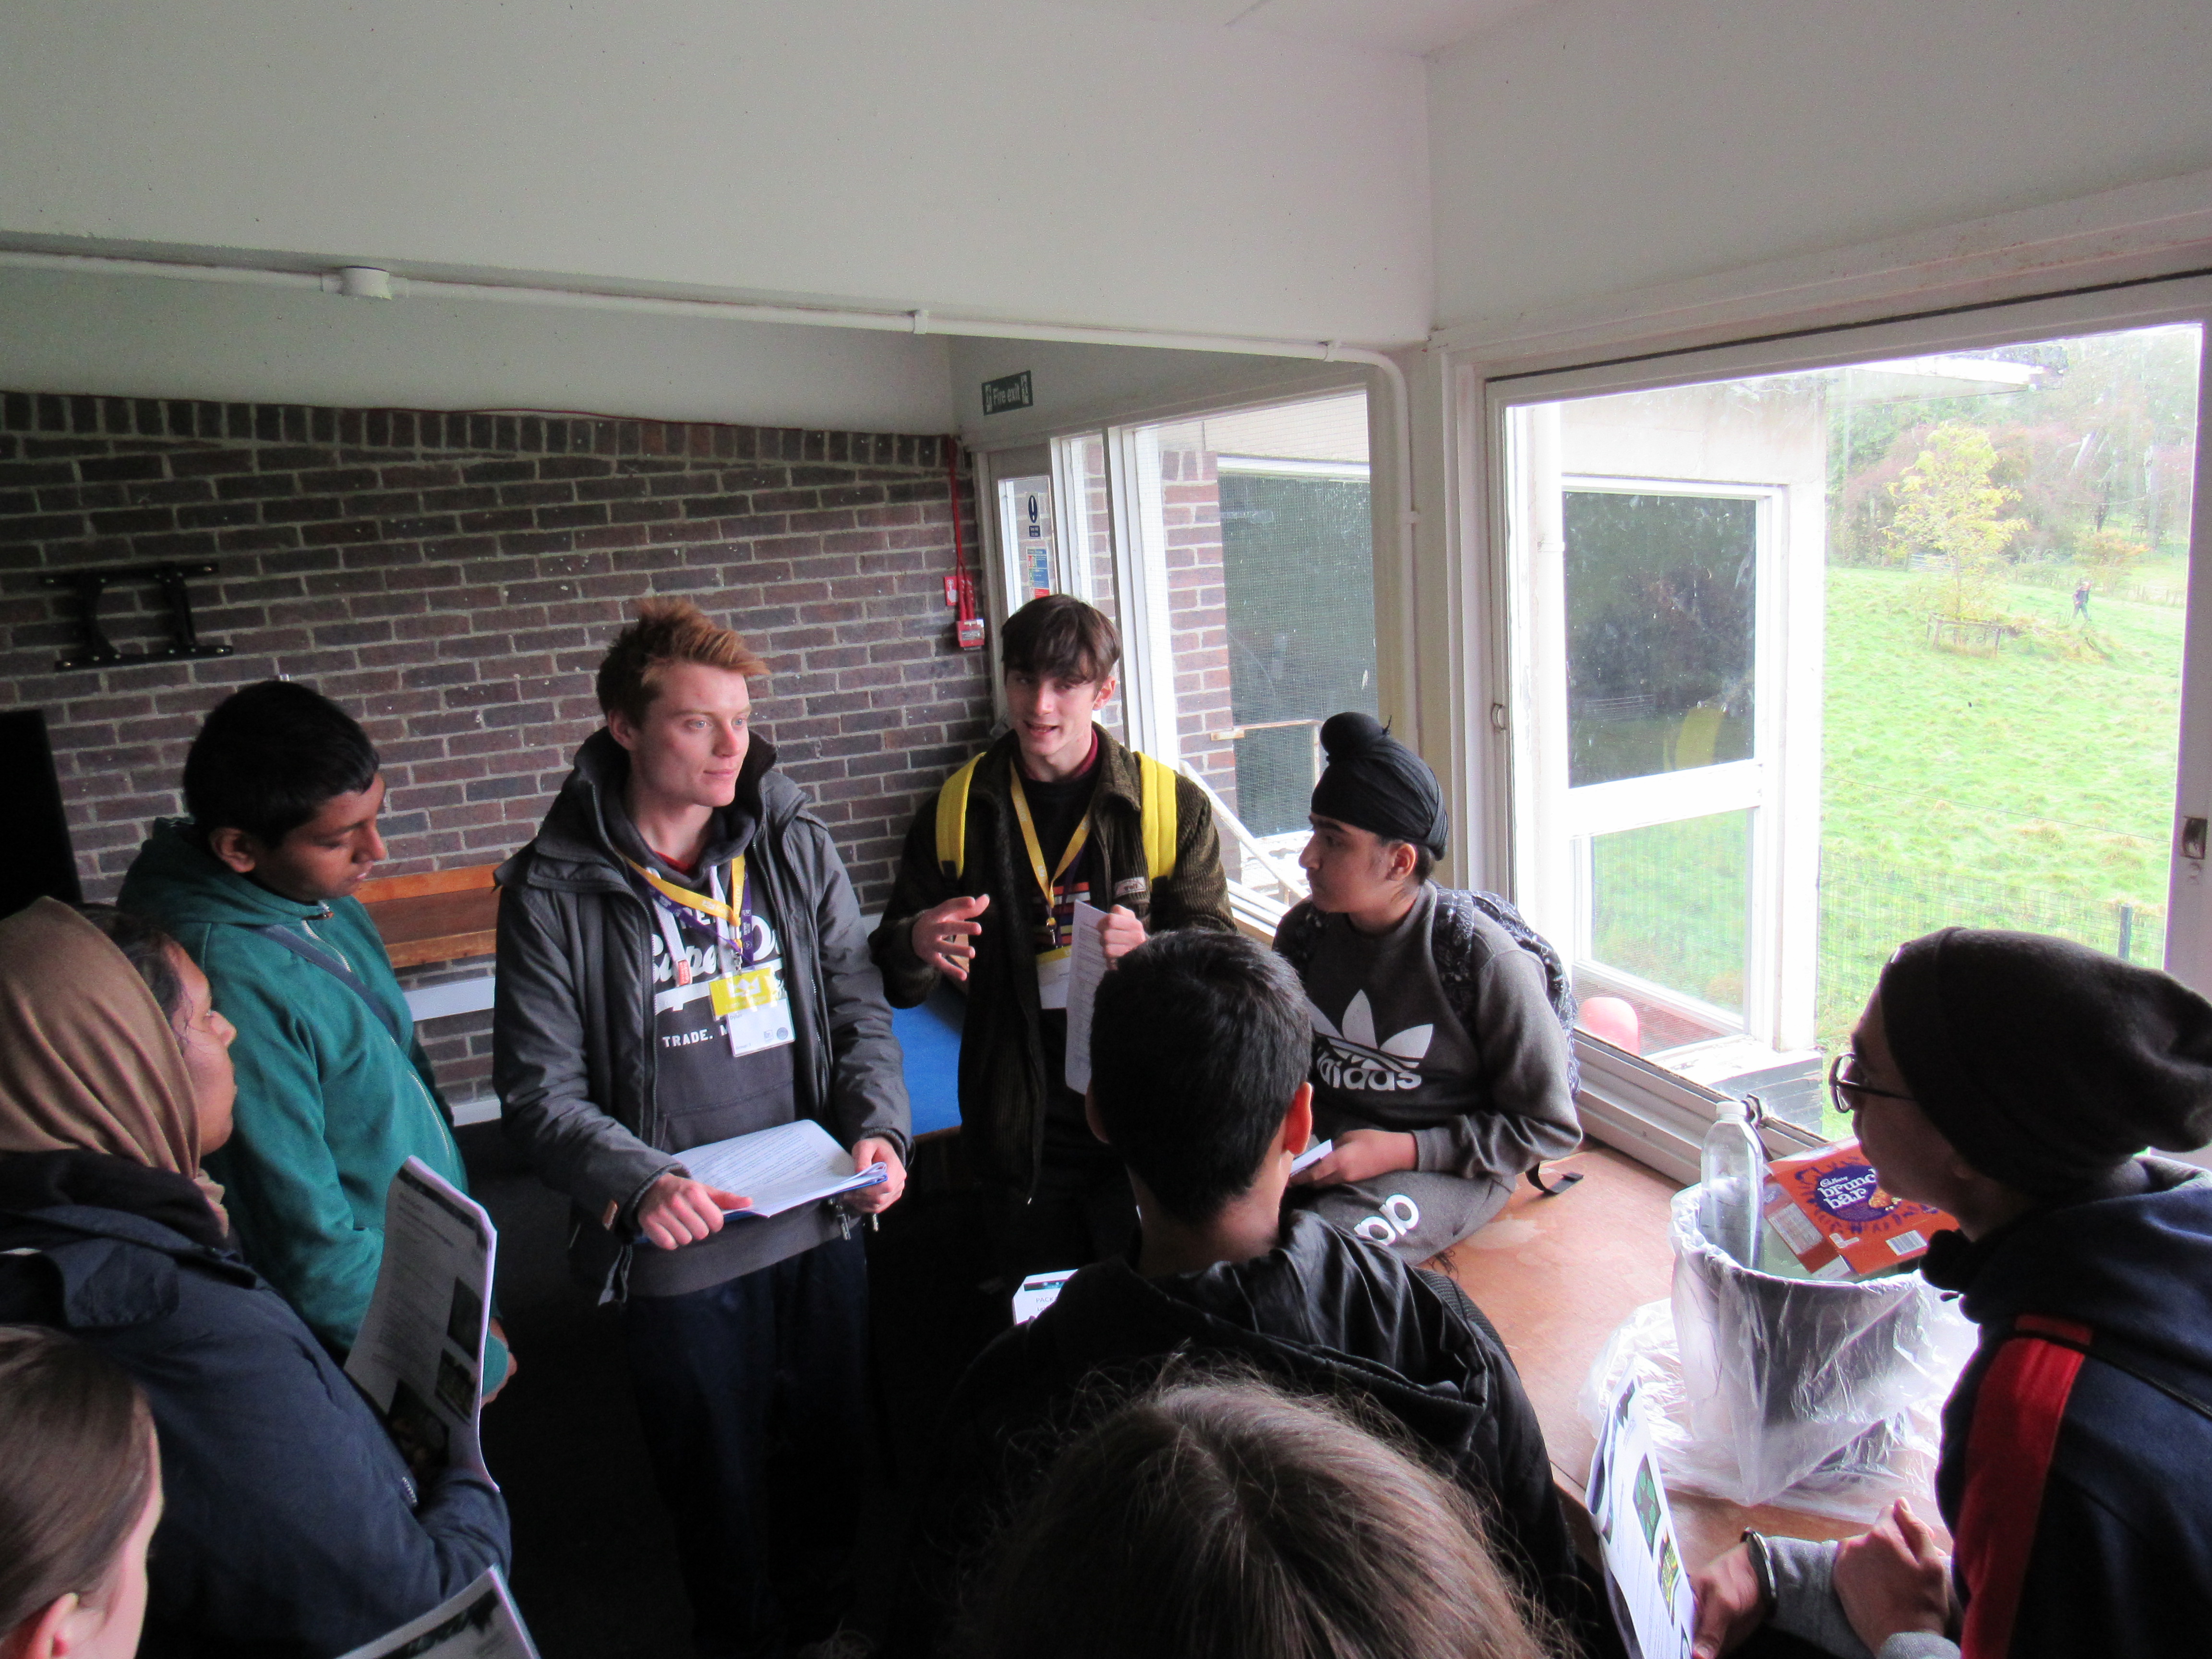 Students taking part in the food trail activity as part of the residential